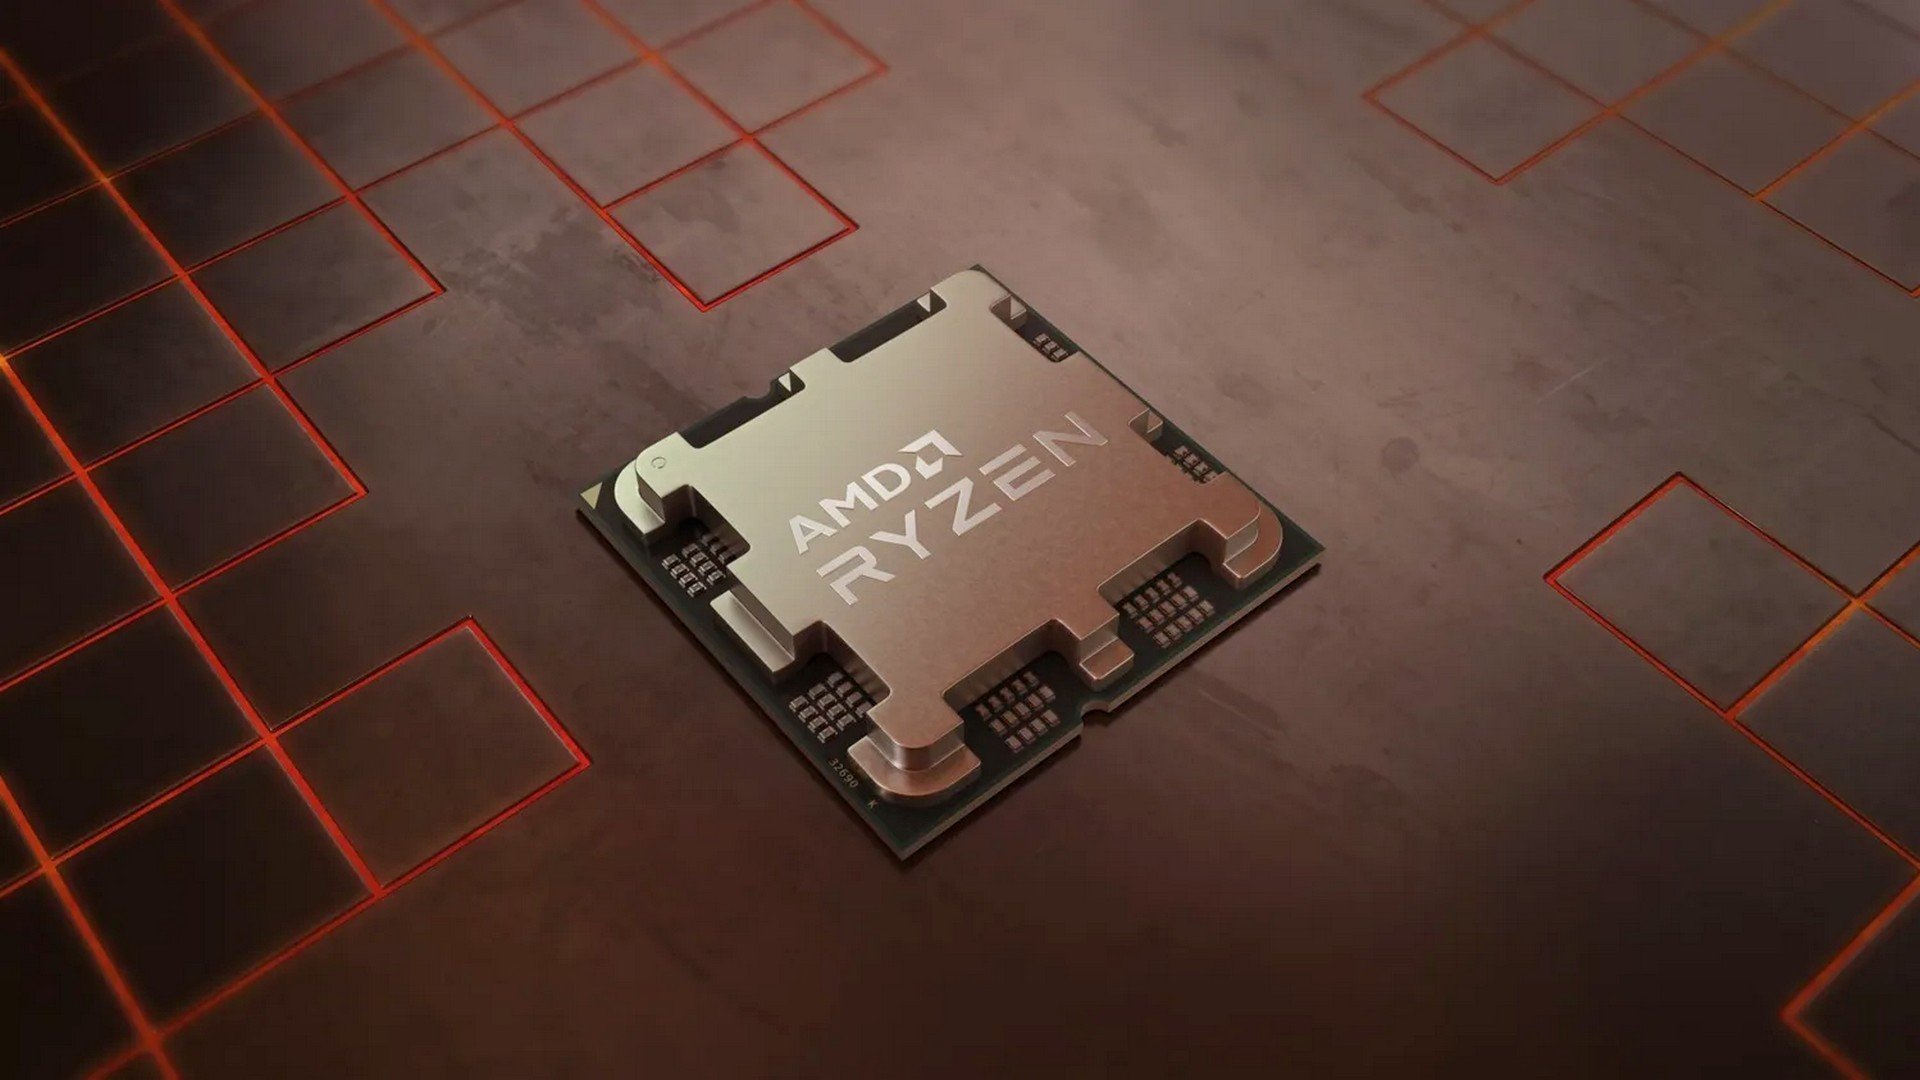 Processor rumors: desktop Intel Meteor Lake won't come out in 2023, Ryzen 7000X3D line will have no 12/16-Core Models